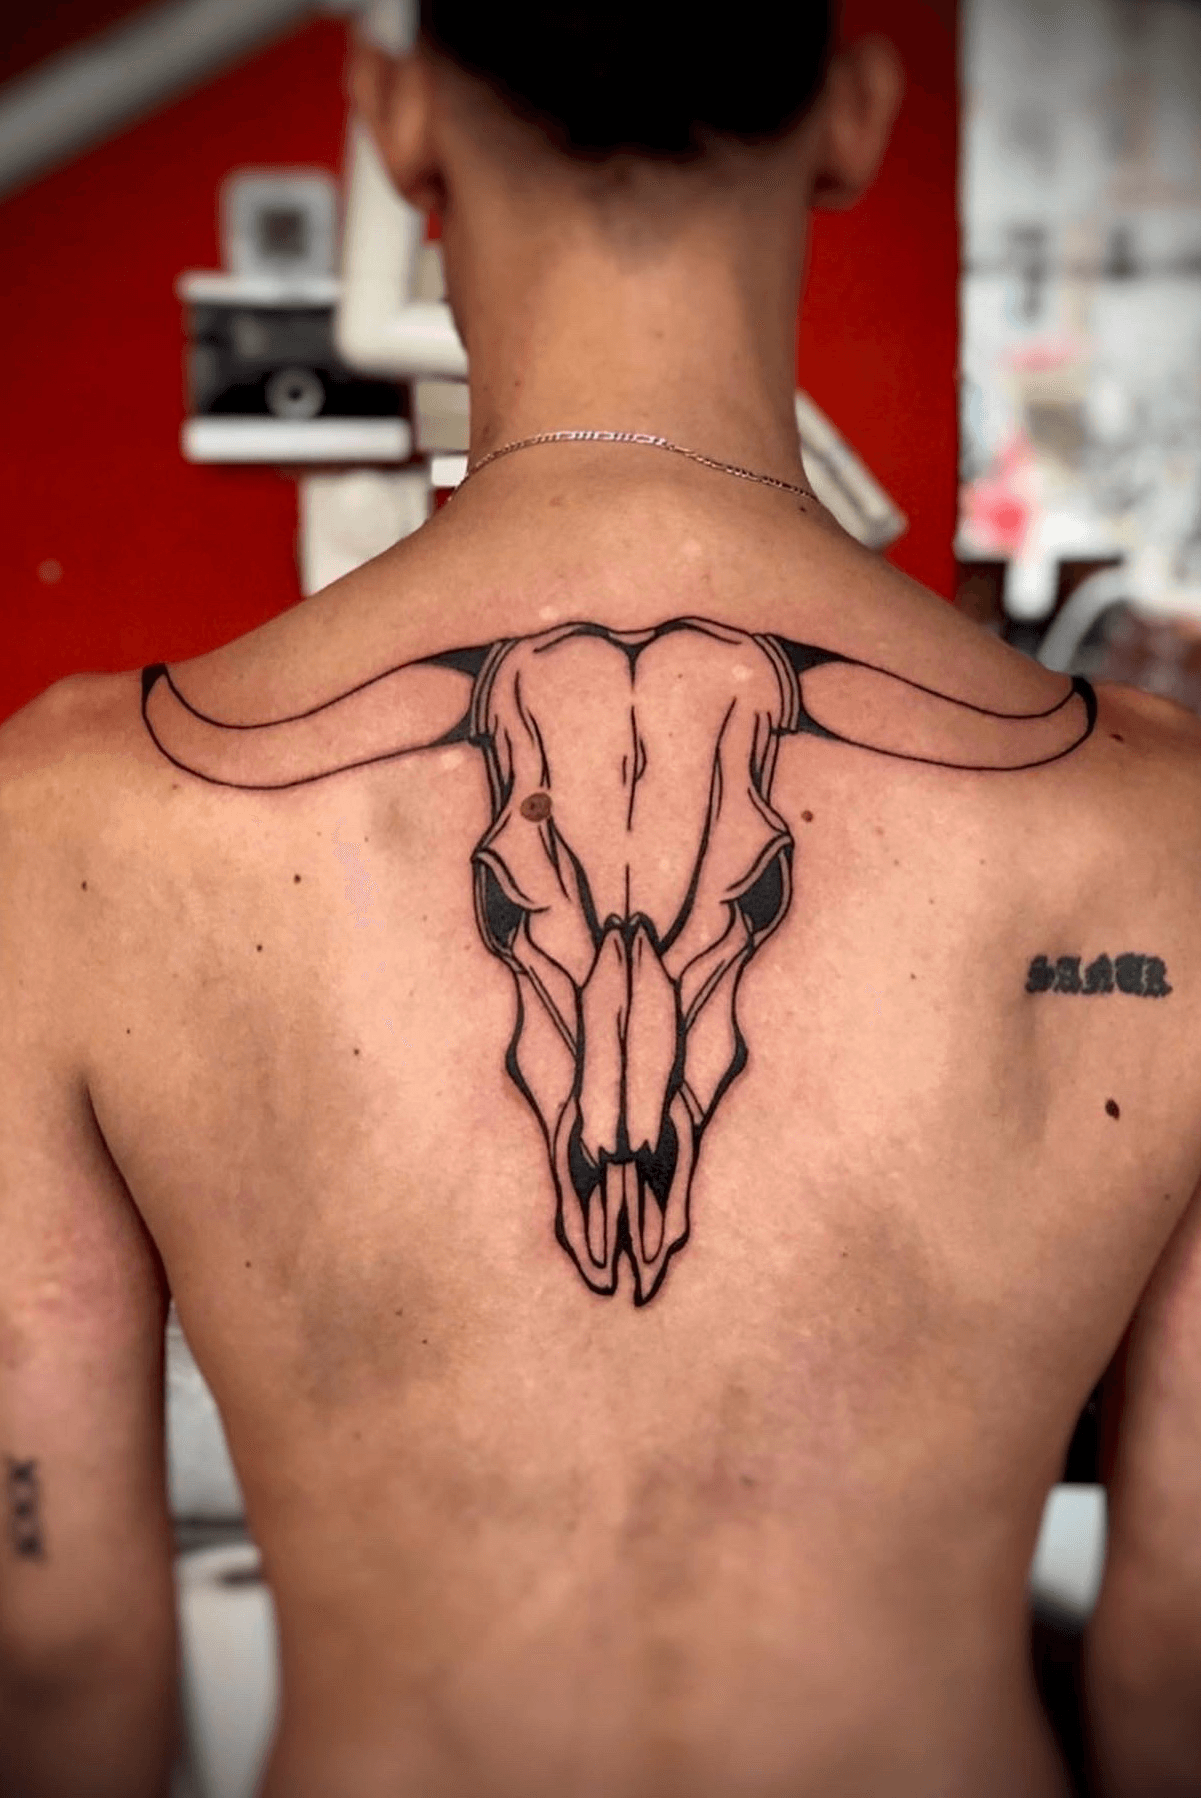 Tattoo uploaded by Israel Celli  BULL SKULL First session done on jvrmr  took like a champ Thanks again my friend I love doing skull heheh   so if you want a